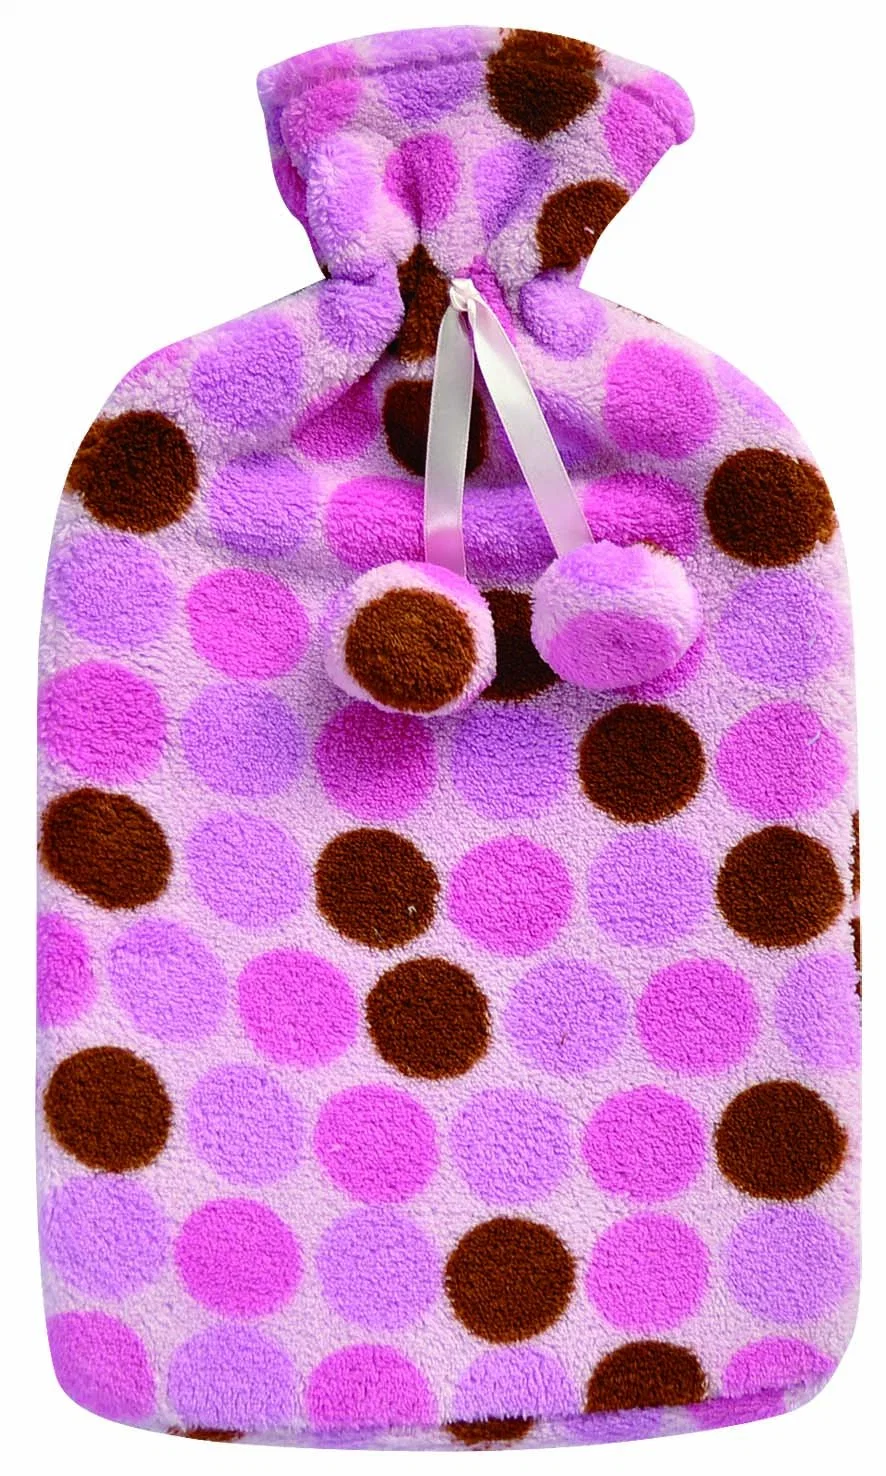 Popular Dots Design Coral Fleece Cover for Hot Water Bottle